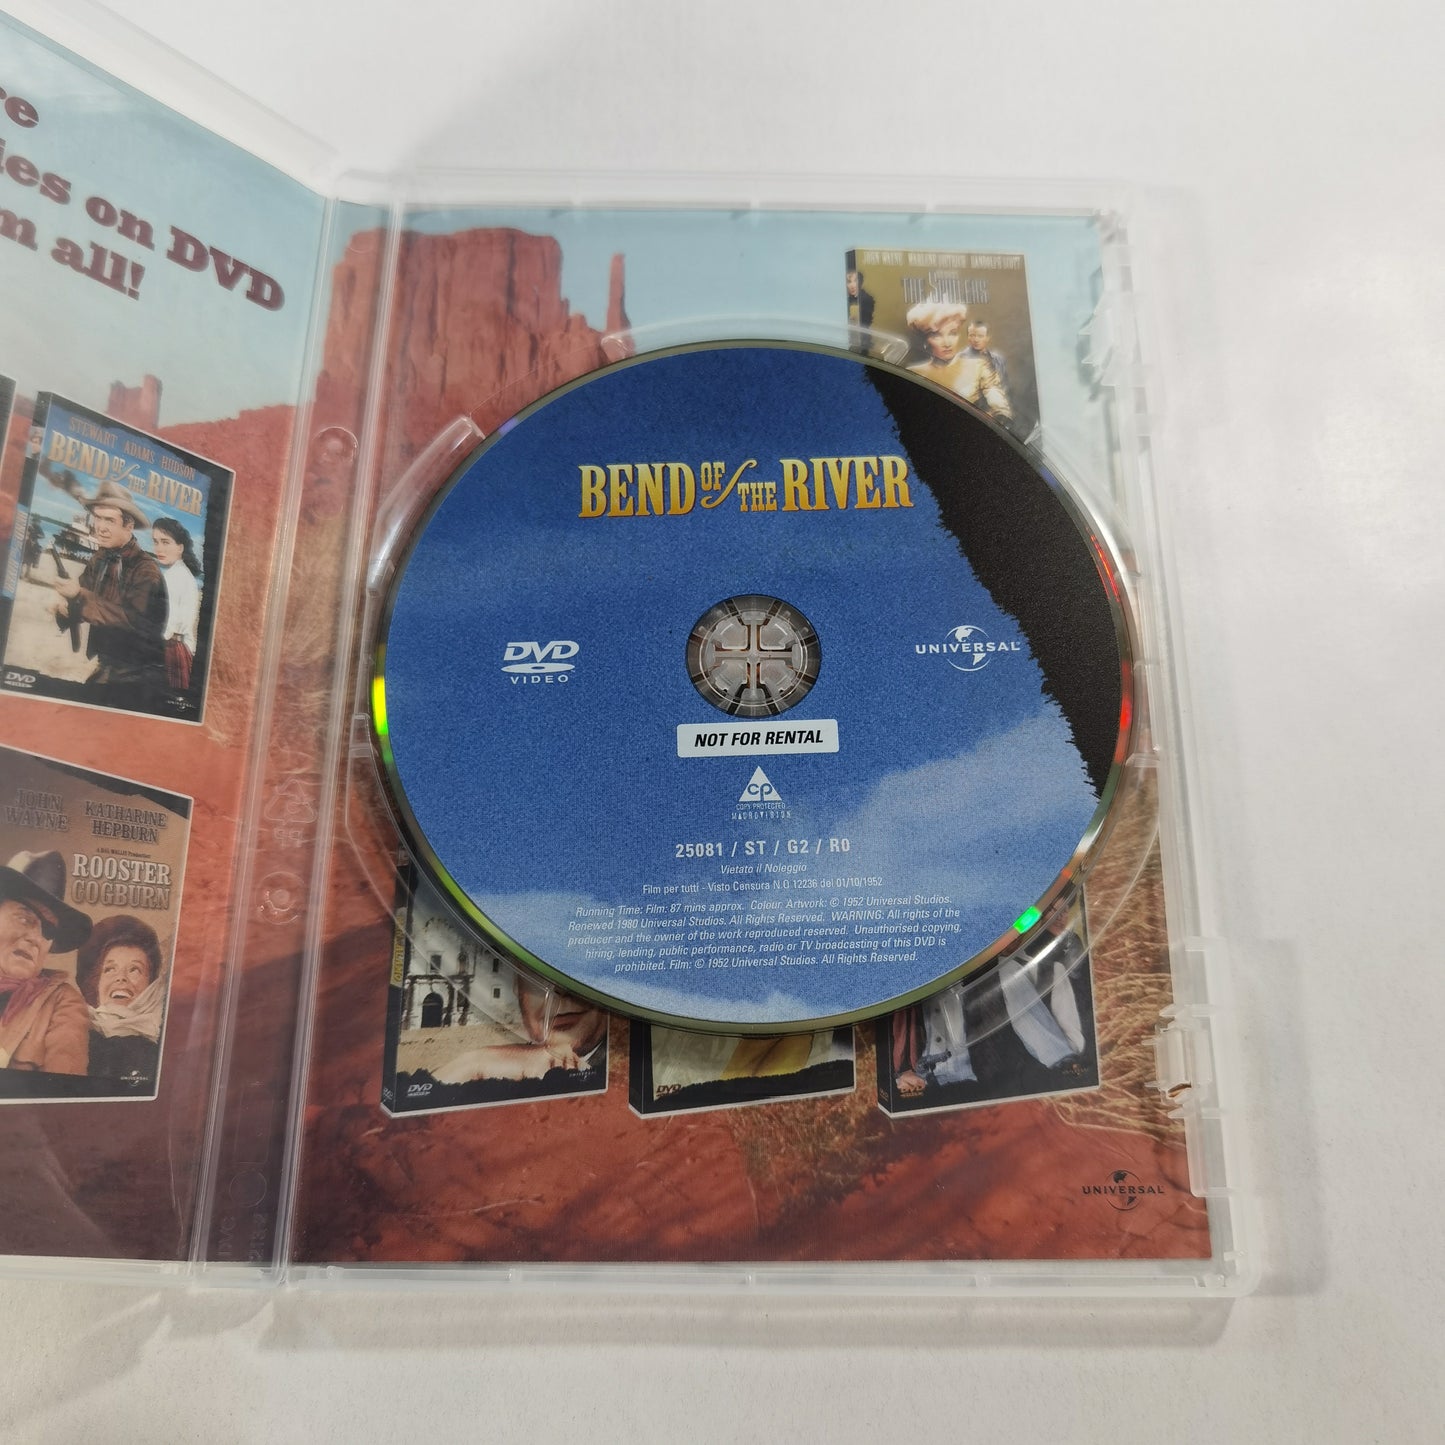 Bend of the River (1952) - DVD SE 2004